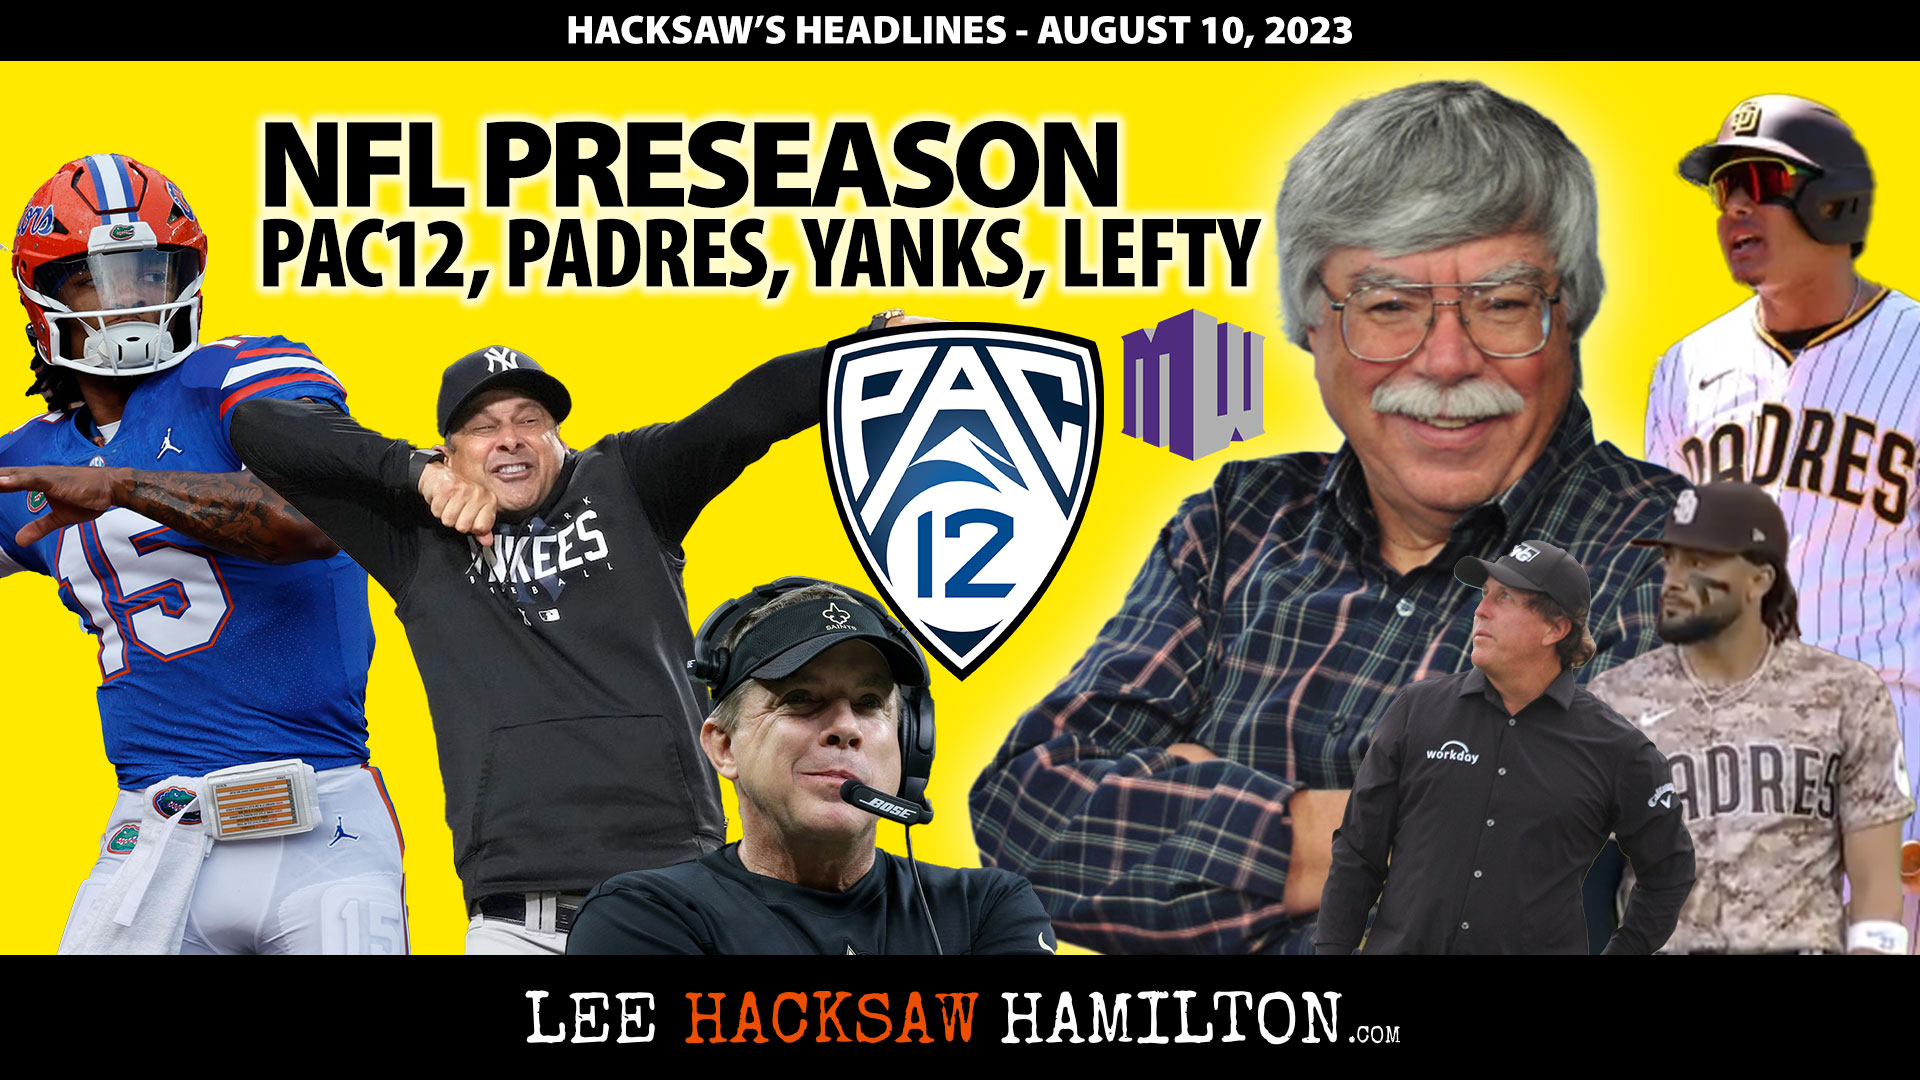 Lee Hacksaw Hamilton discusses Padres Pitiful Display, Yankees Meltdown, PAC12 News, NFL, Premier League, NHL, Phil Mickelson